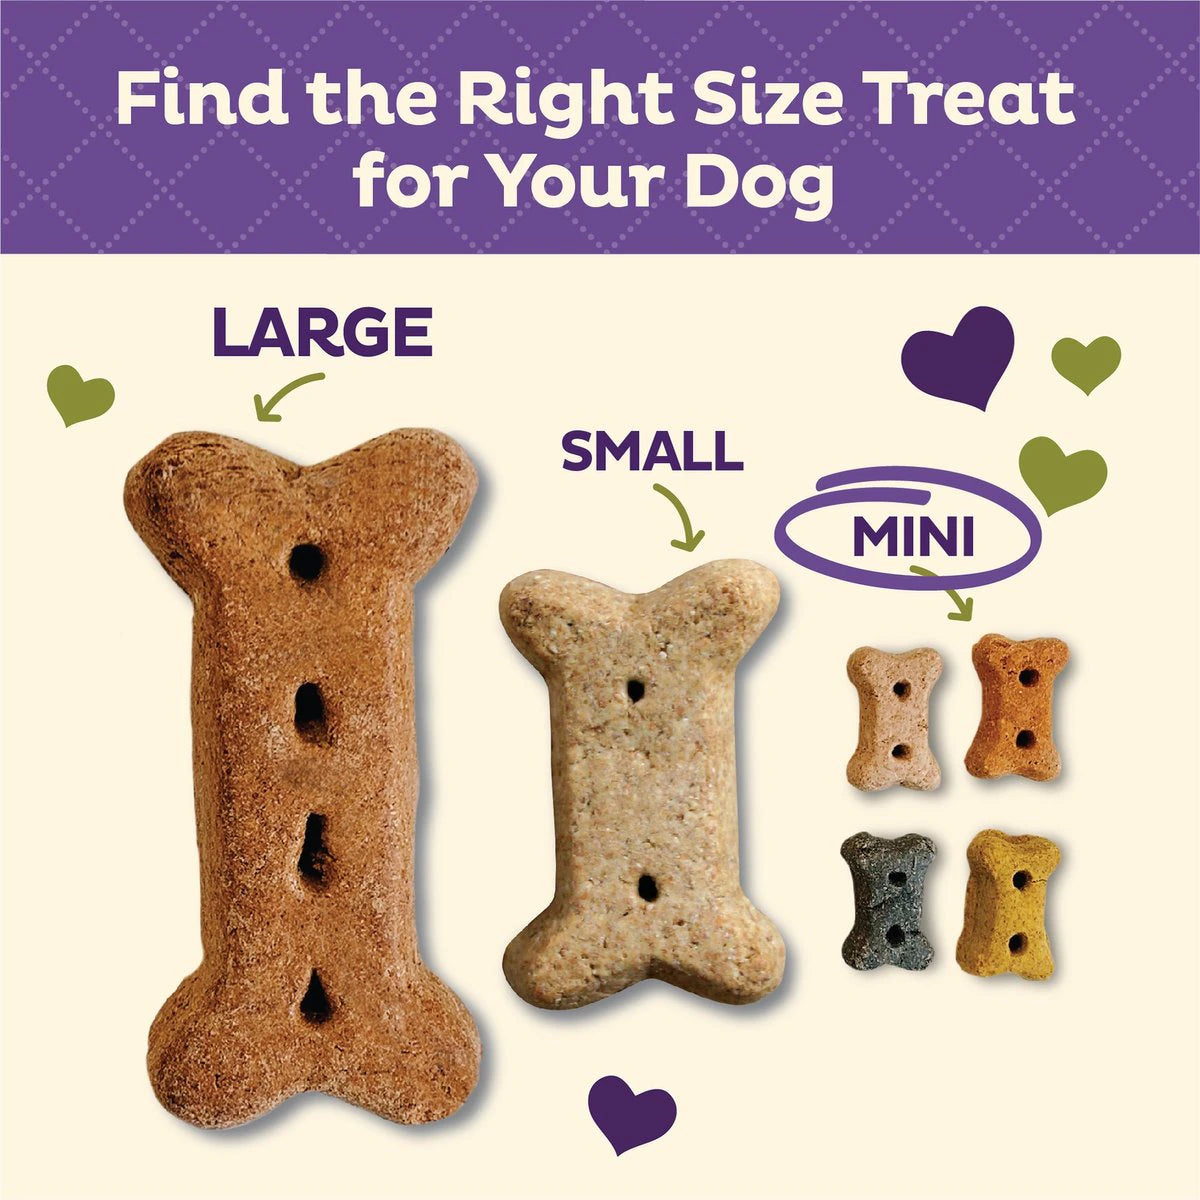 Old Mother Hubbard Mini Grain Free Pick of the Patch  Oven-Baked Dog Biscuits  Dog Treats  | PetMax Canada